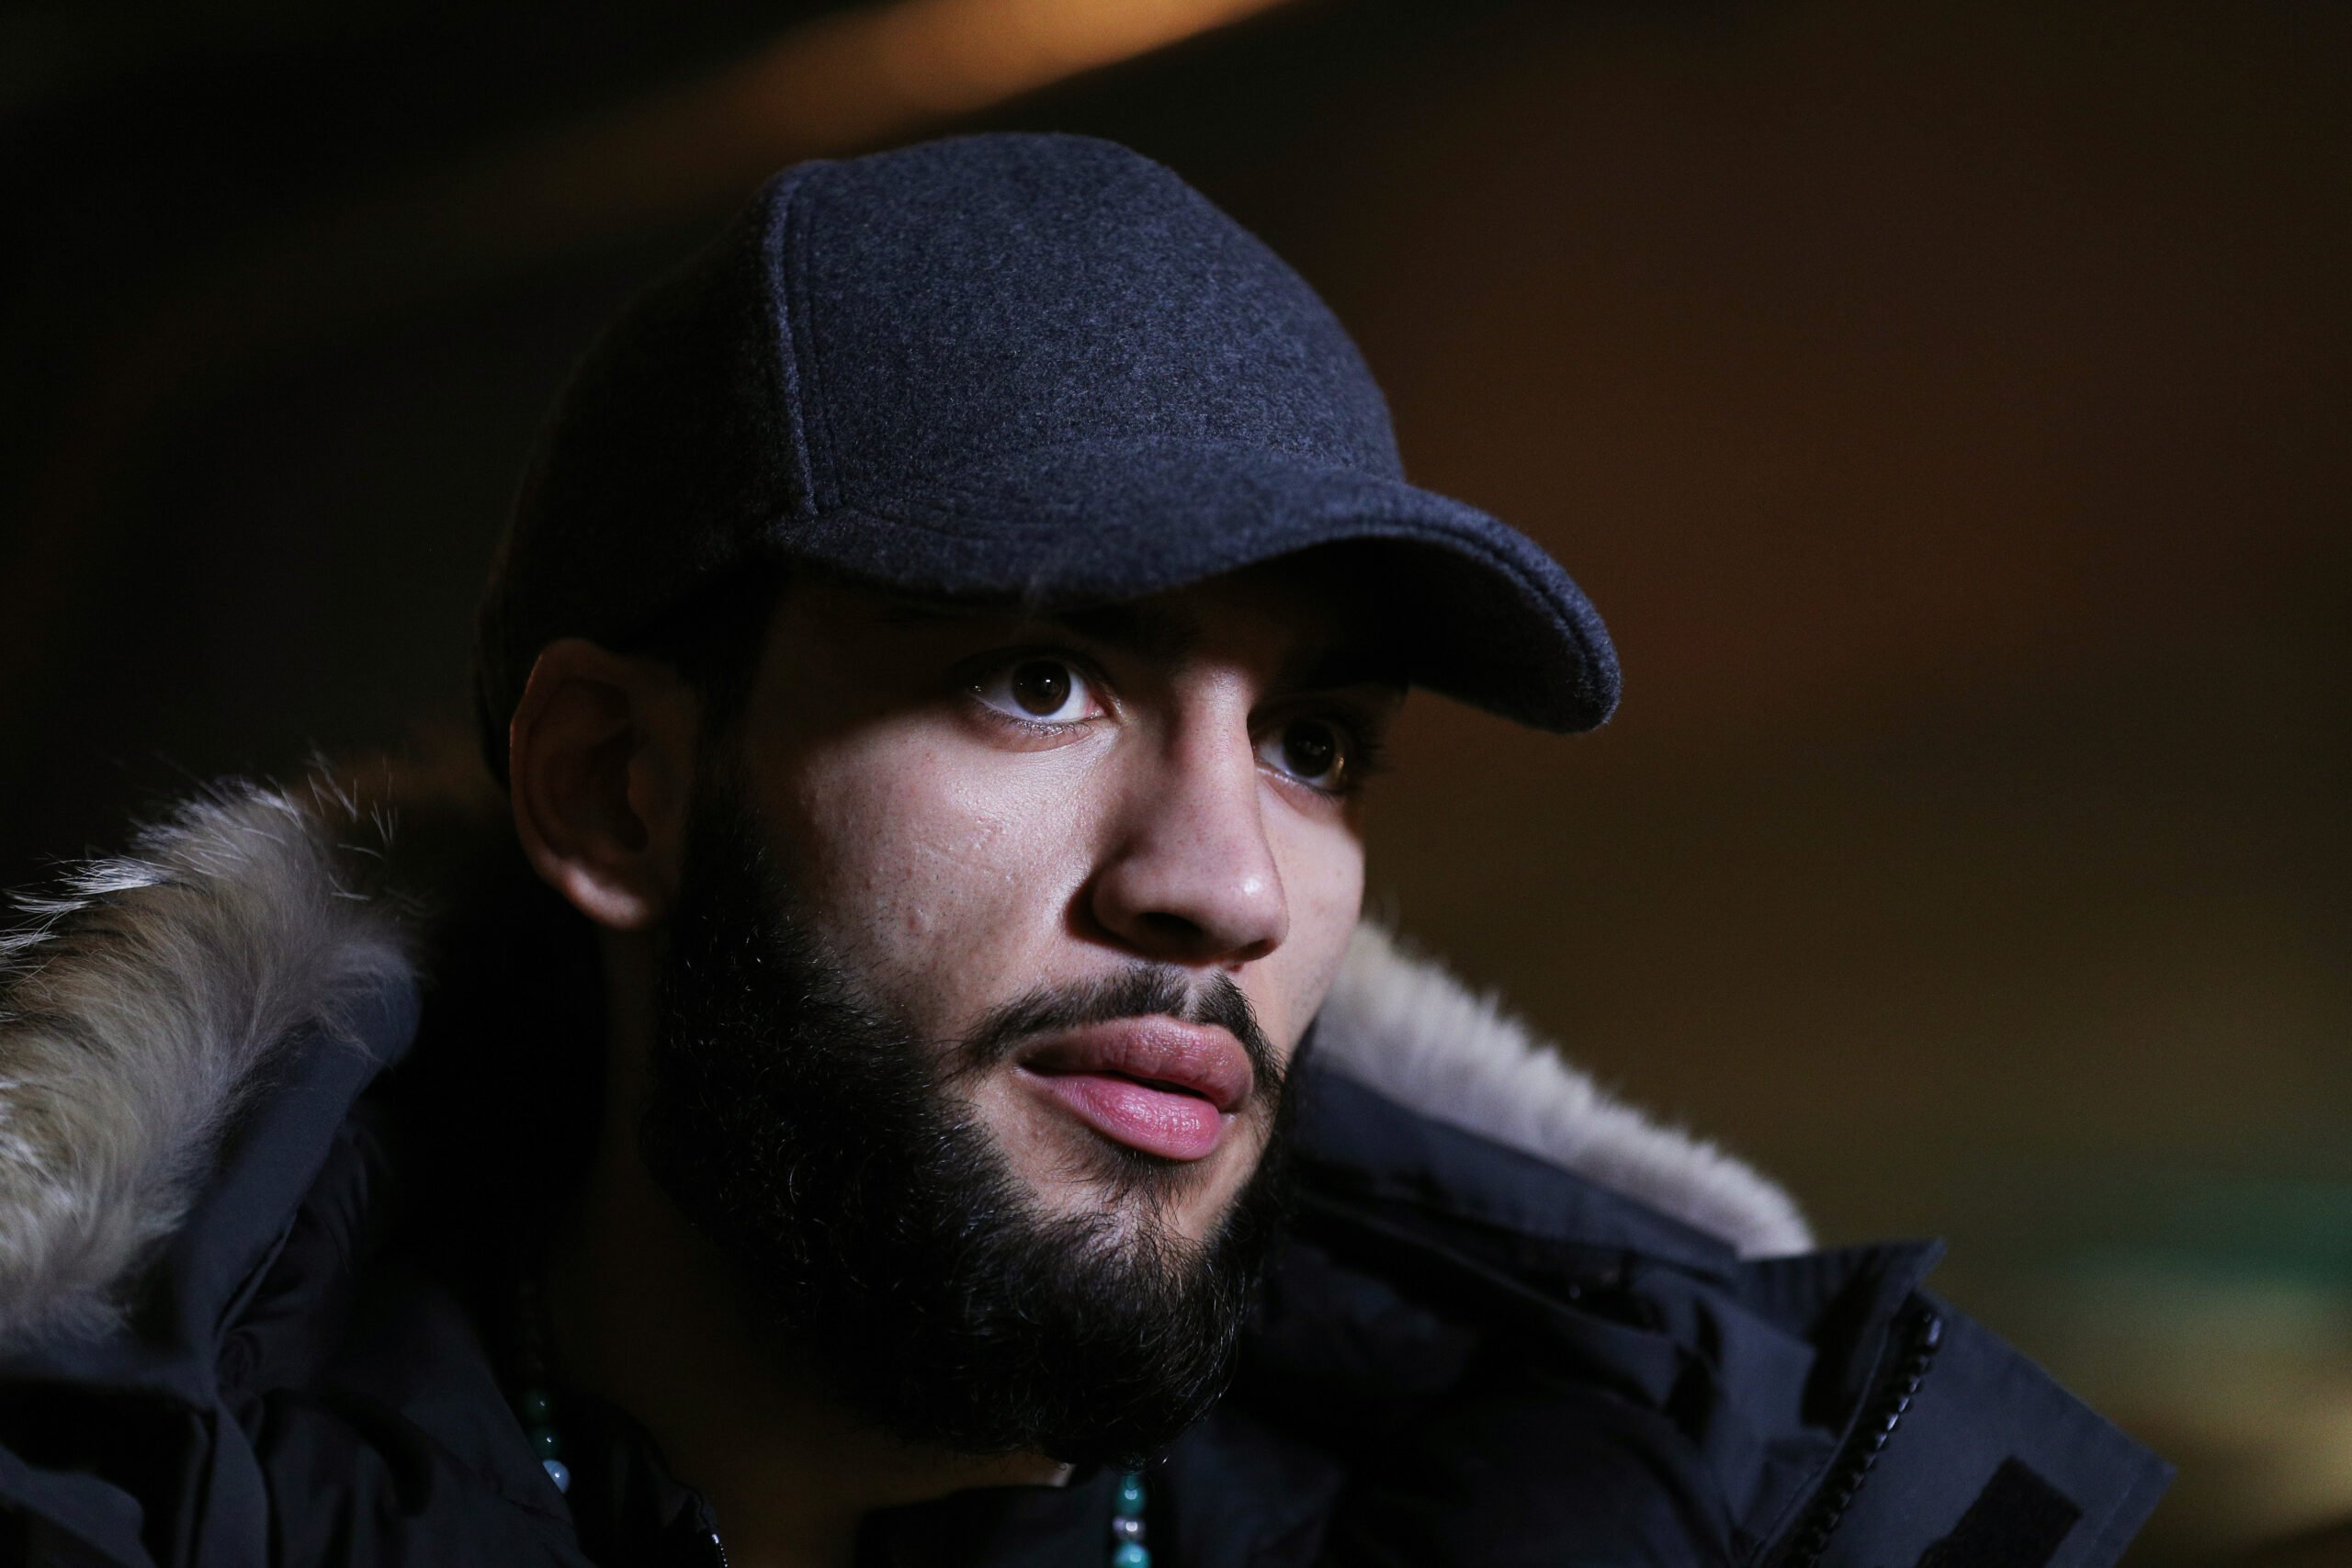 "It's an explosive fight" - Hamzah Sheeraz on possibly facing Austin "Ammo" Williams this summer in Five vs. Five